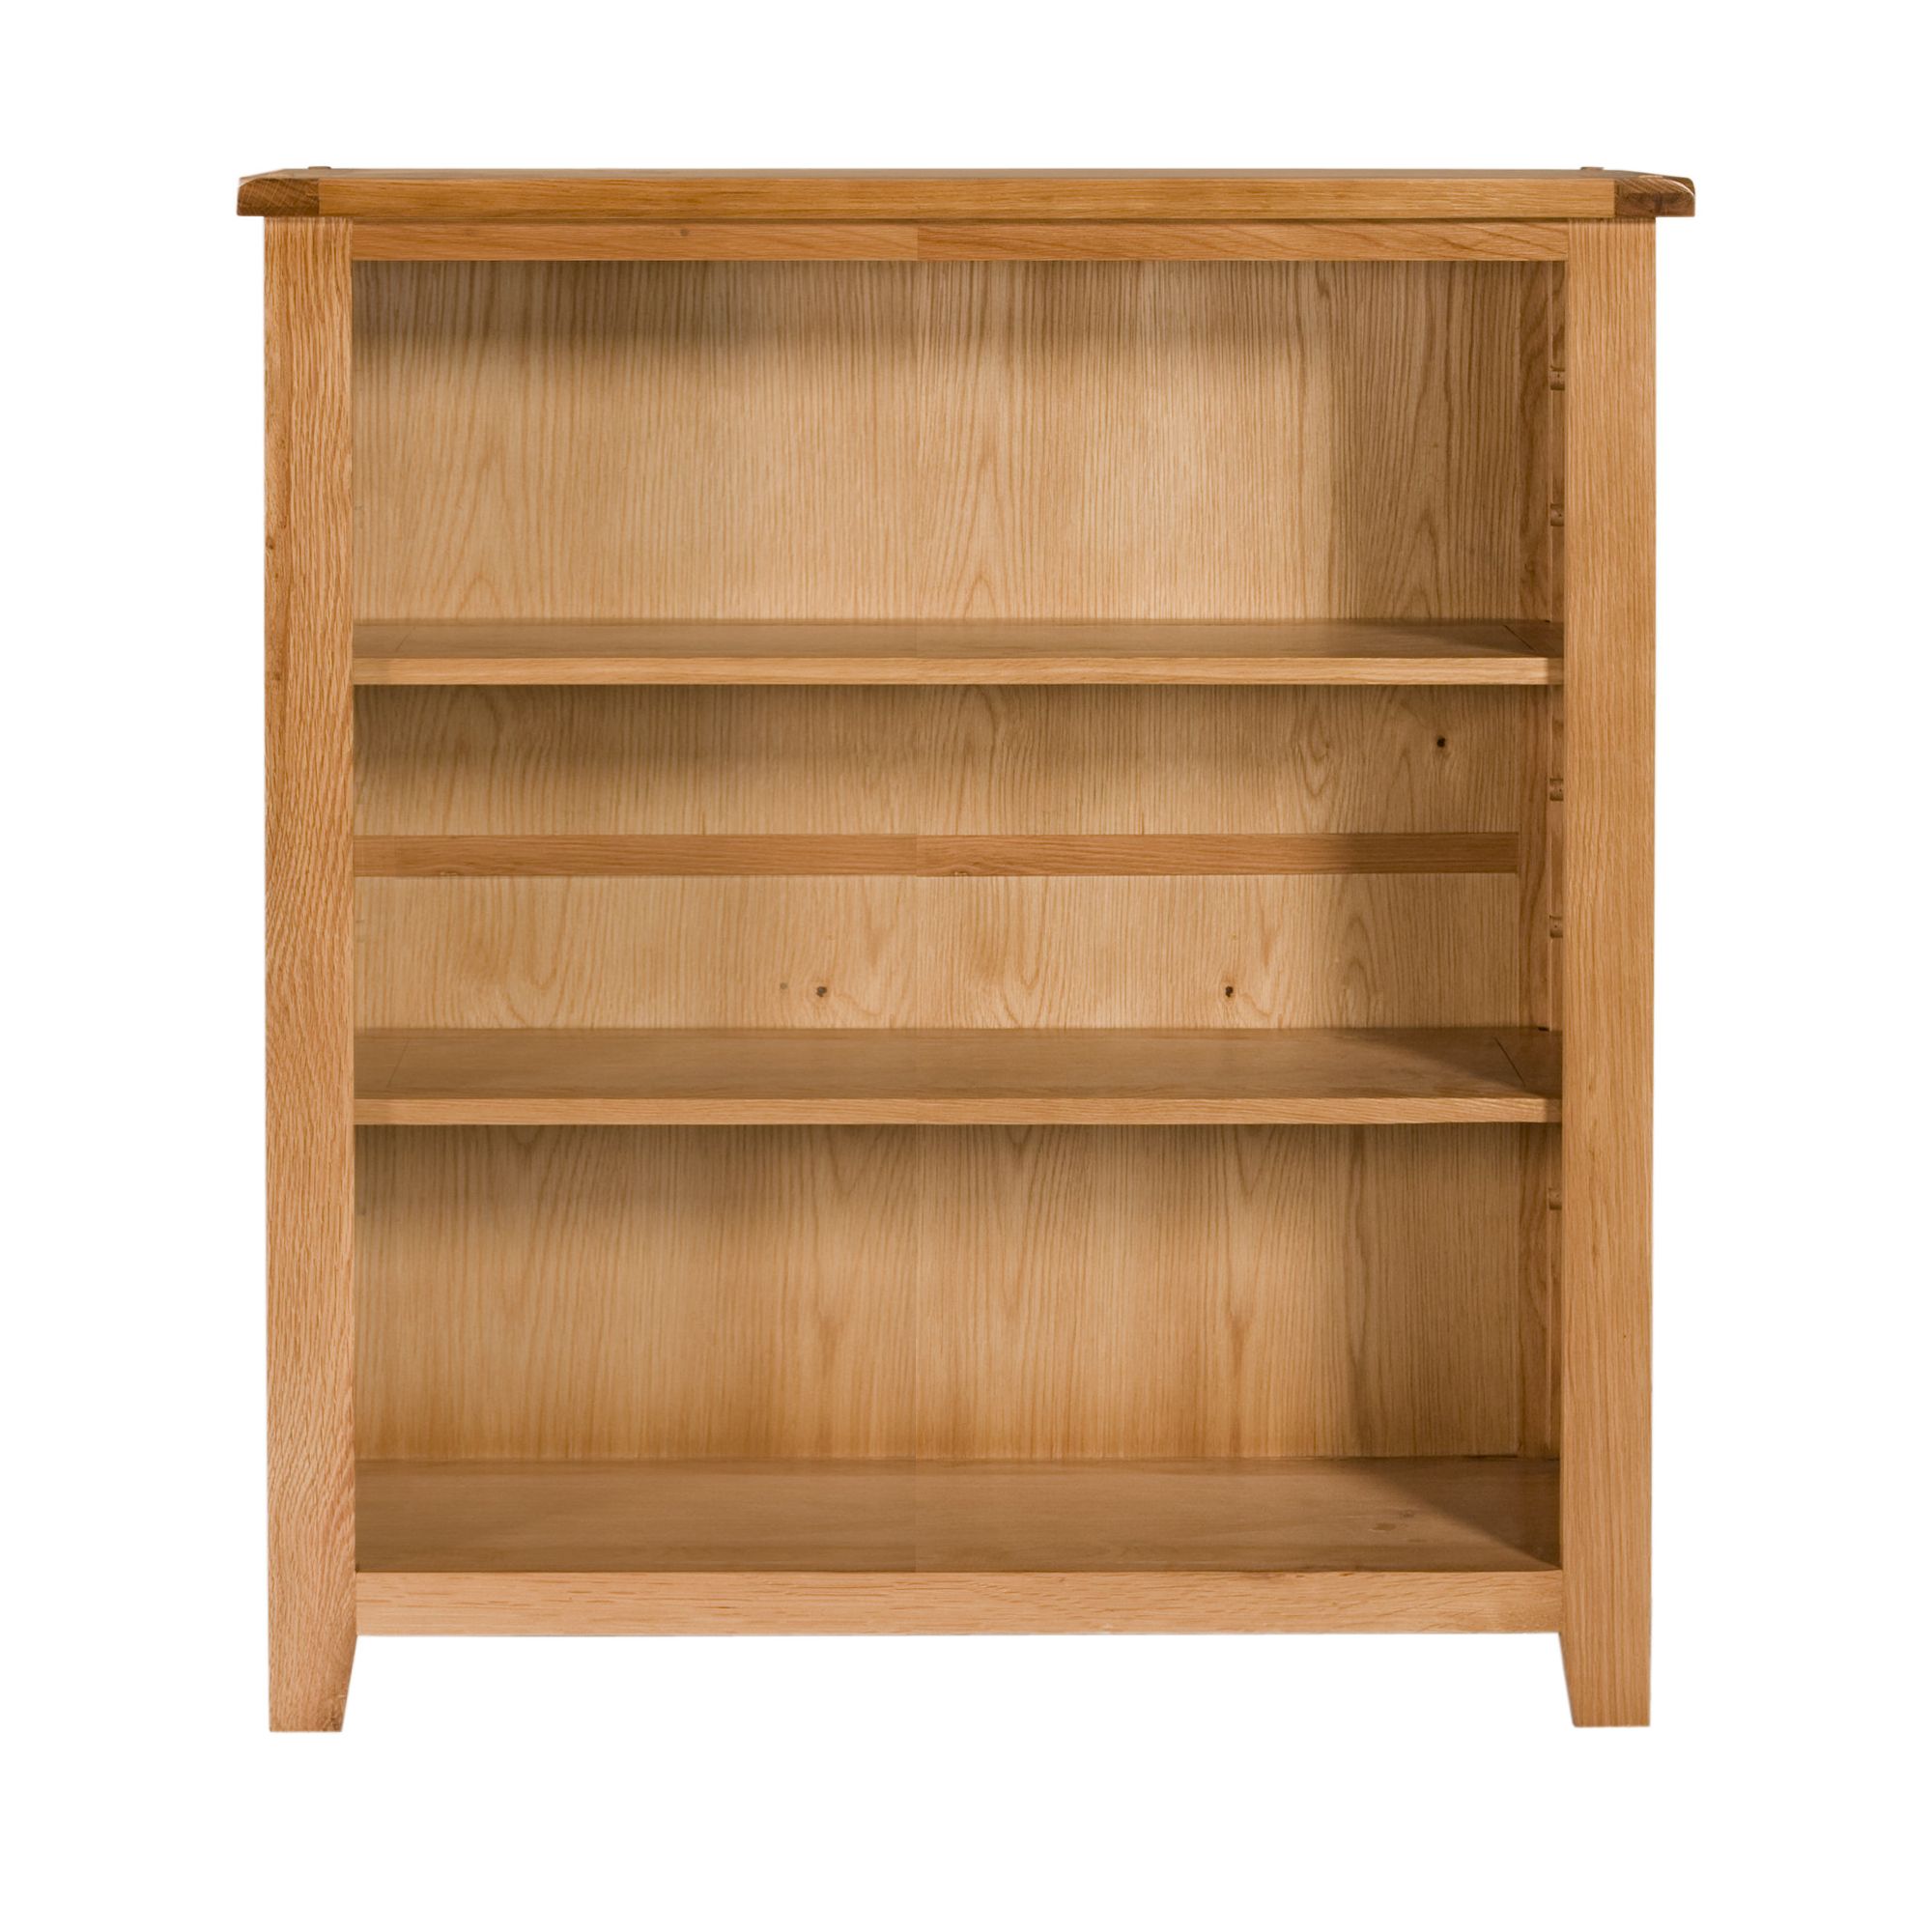 Elements Brunswick Dining Small Bookcase in Warm Lacquer at Tesco Direct